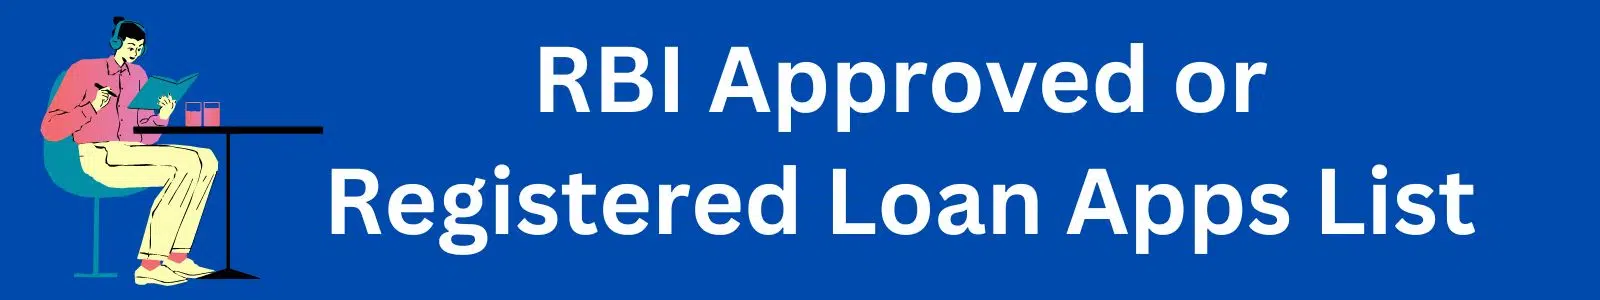 RBI Approved or Registered Loan Apps List